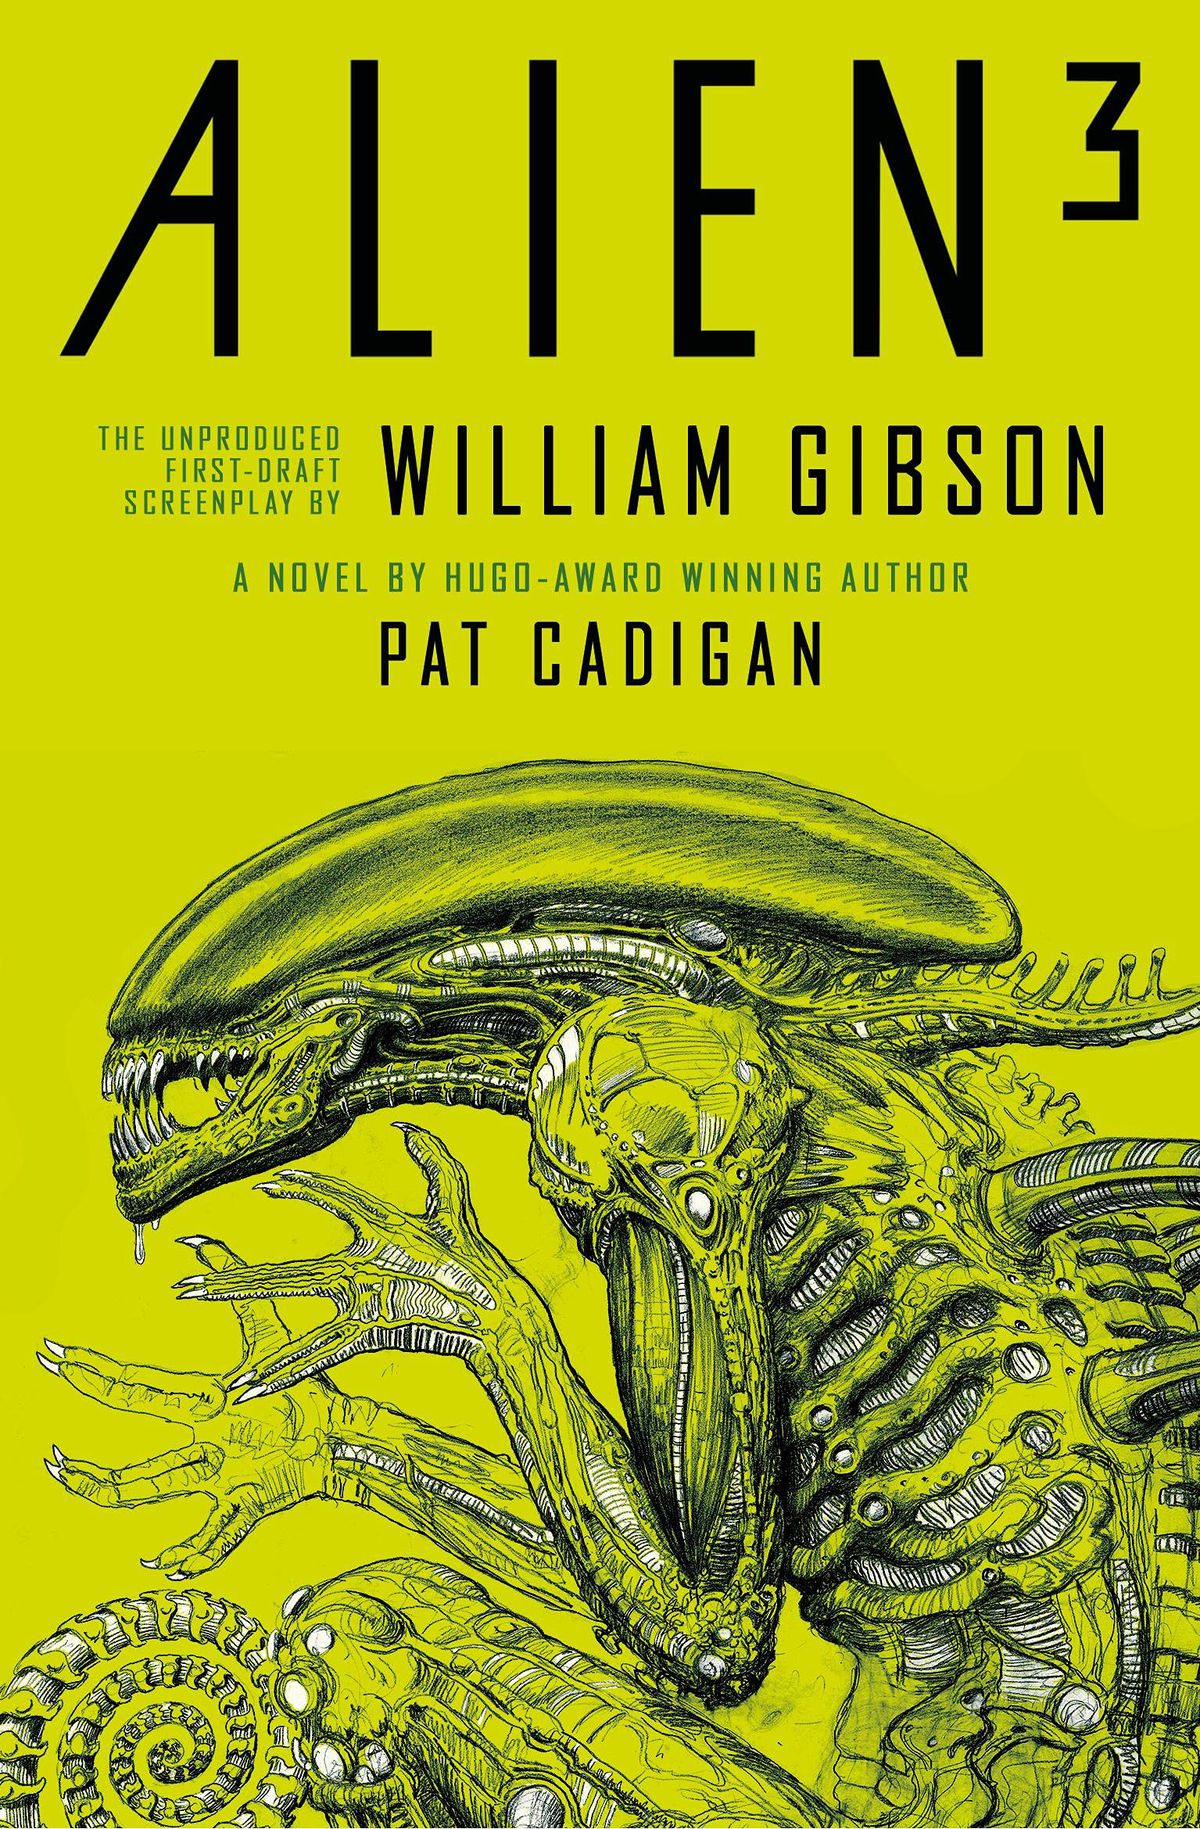 Alien³: The Unproduced First-Draft Screenplay book cover featuring a curled up xenomorph